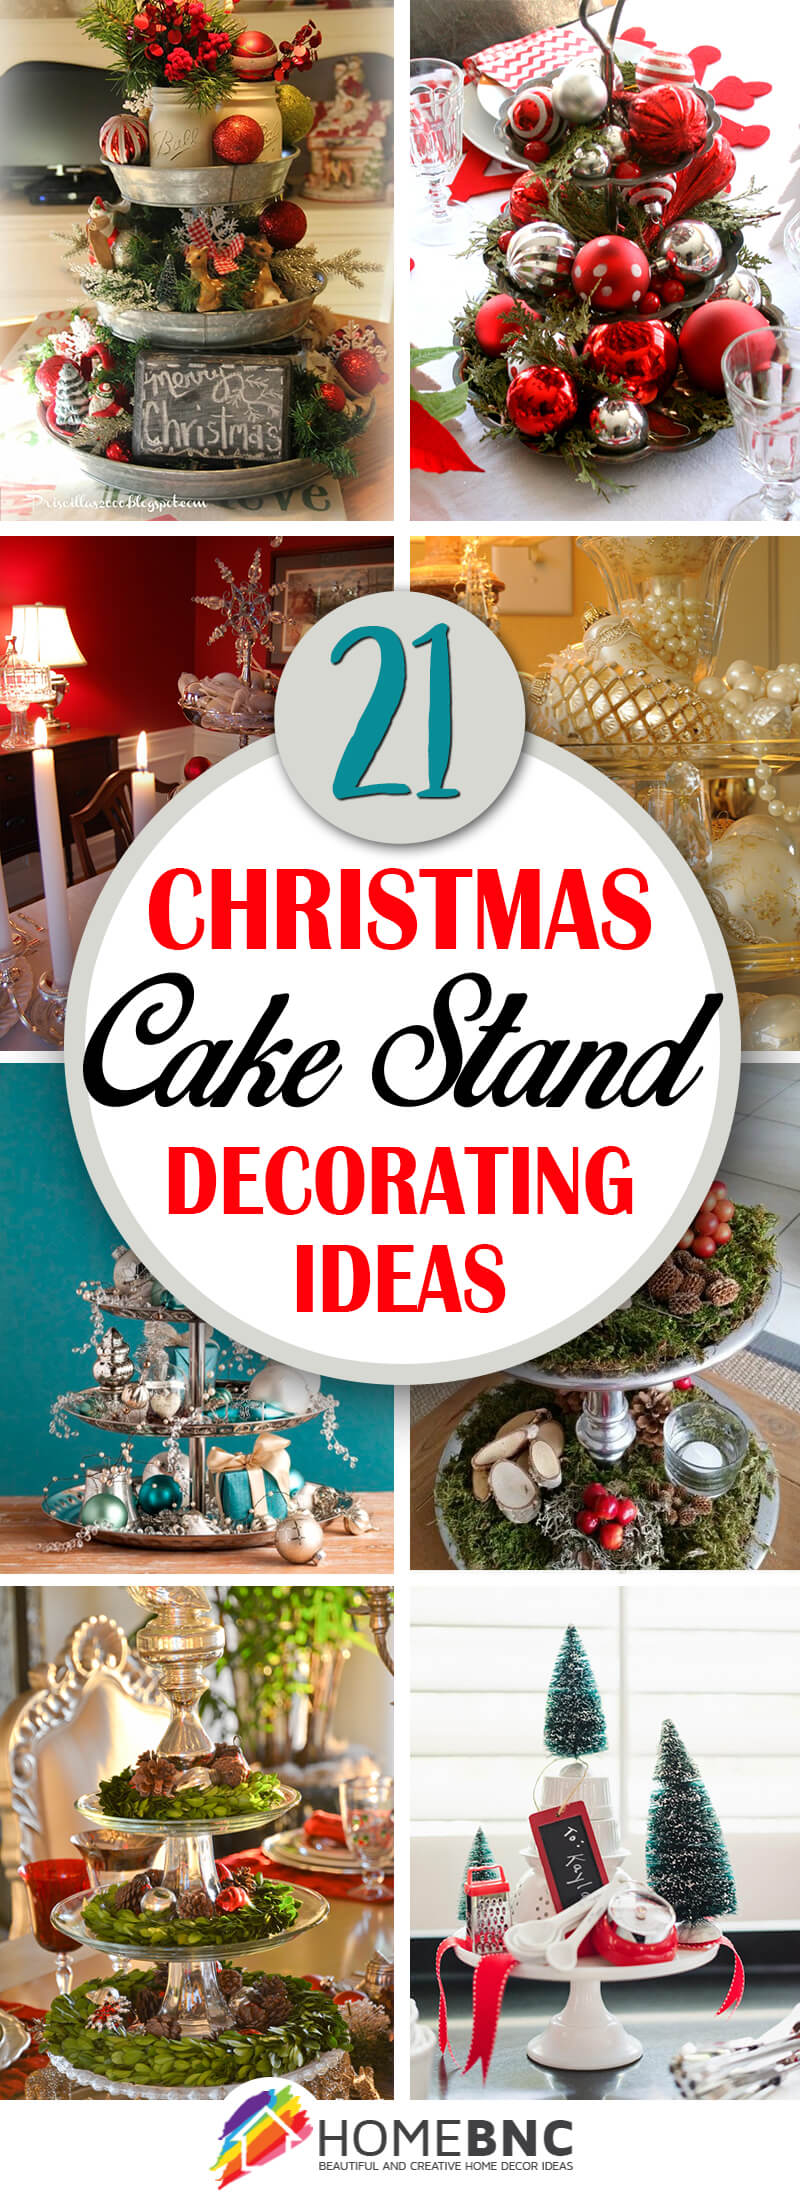 Cake Stand Decorations